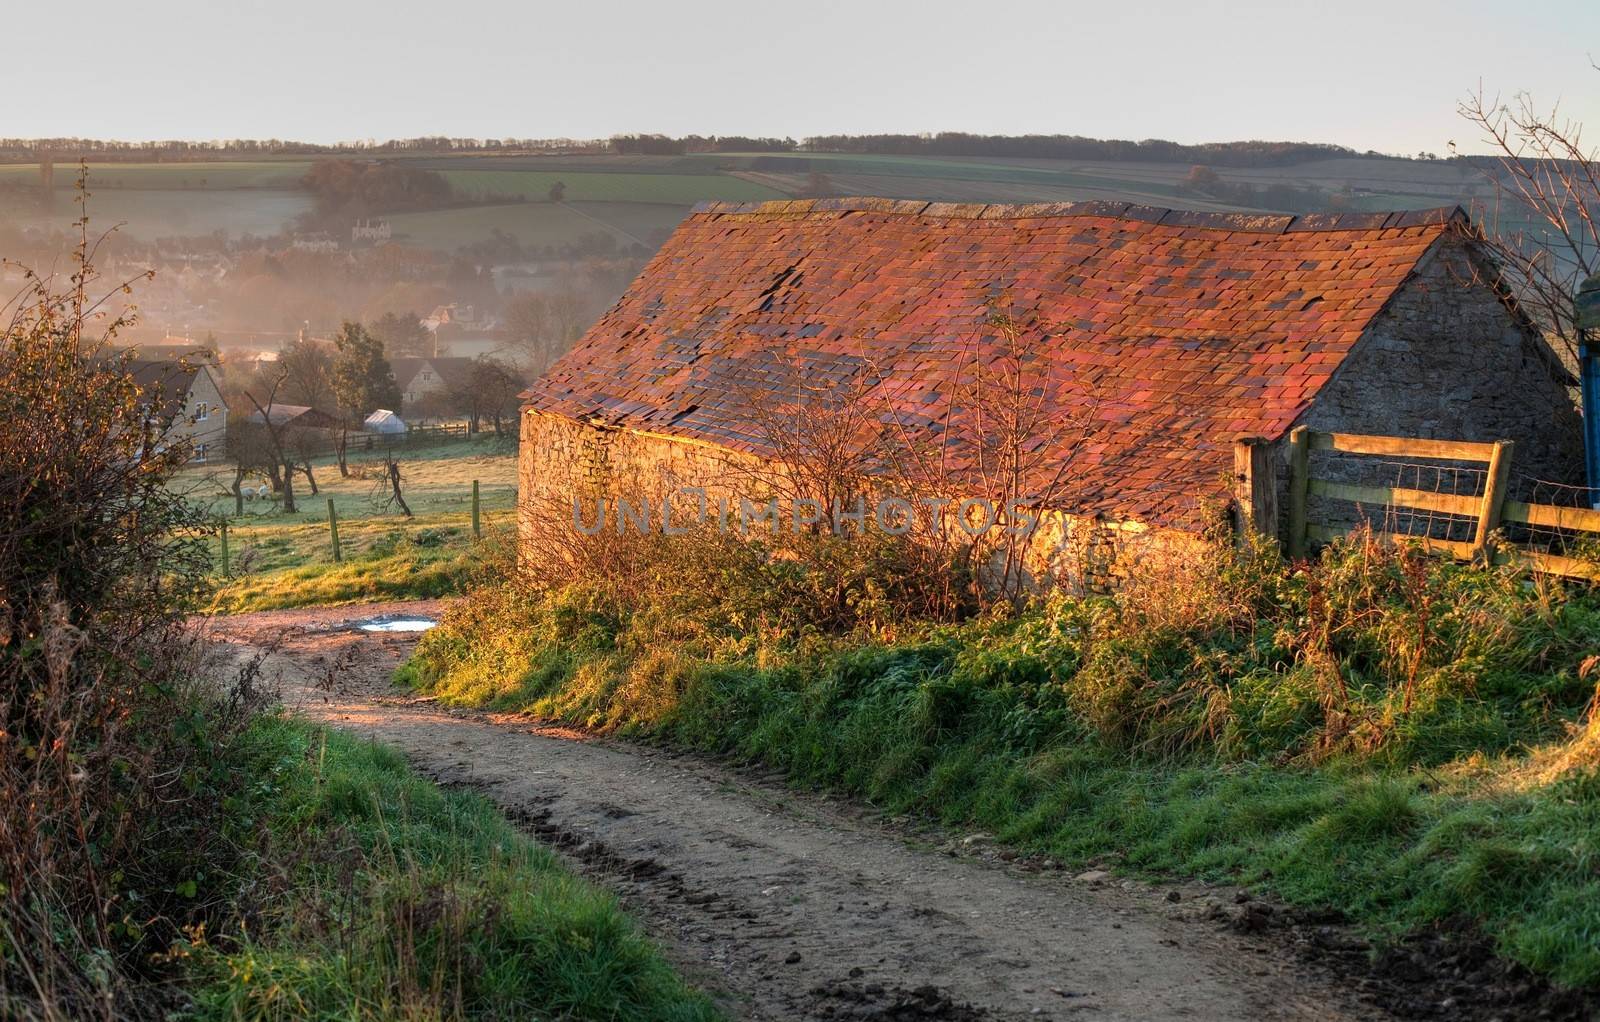 Old barn on the Cotswold Way, heading towards Chipping Campden, Gloucestershire, England.